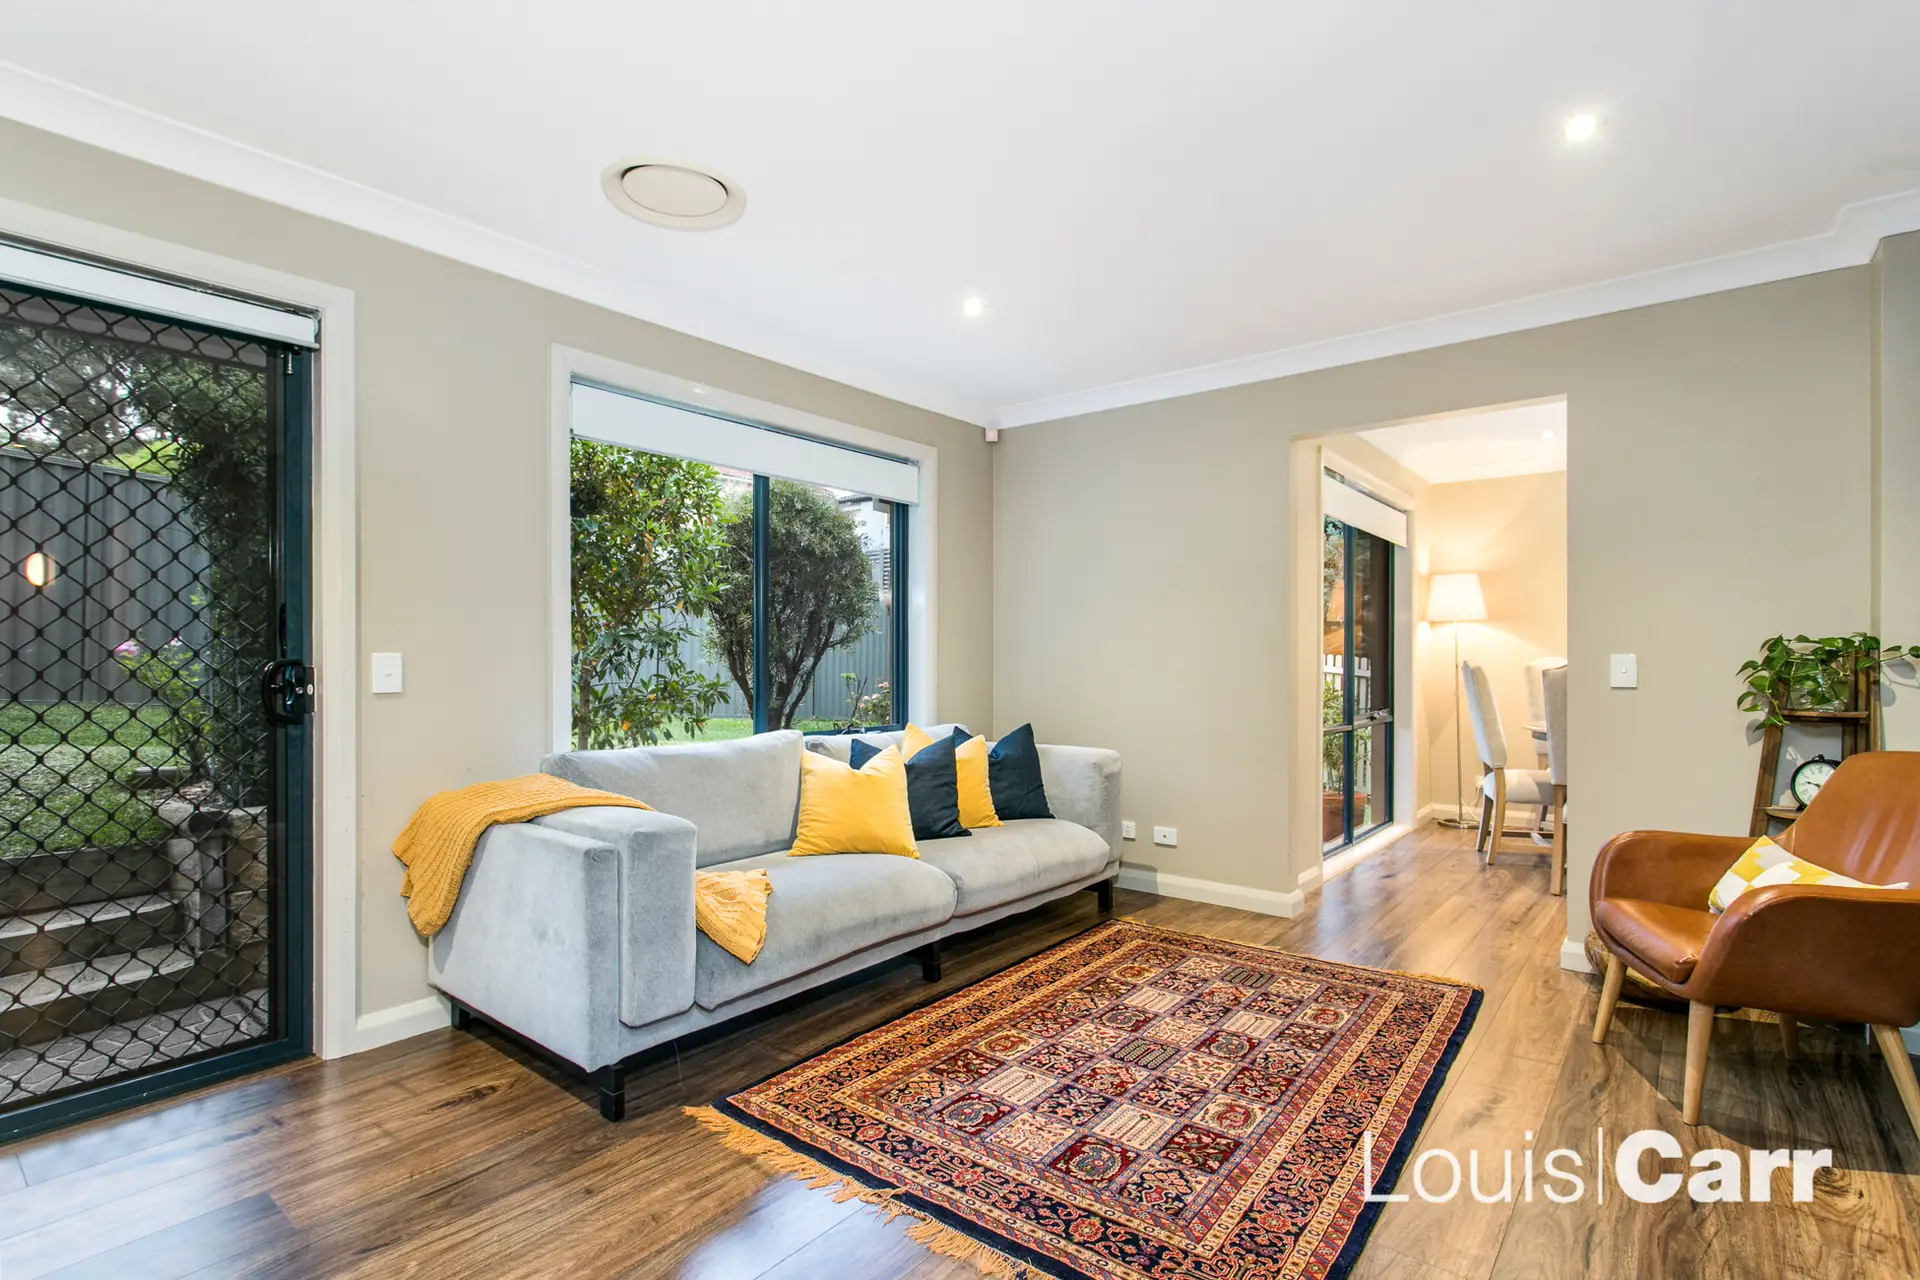 Photo #4: 7 Peartree Circuit, West Pennant Hills - Sold by Louis Carr Real Estate